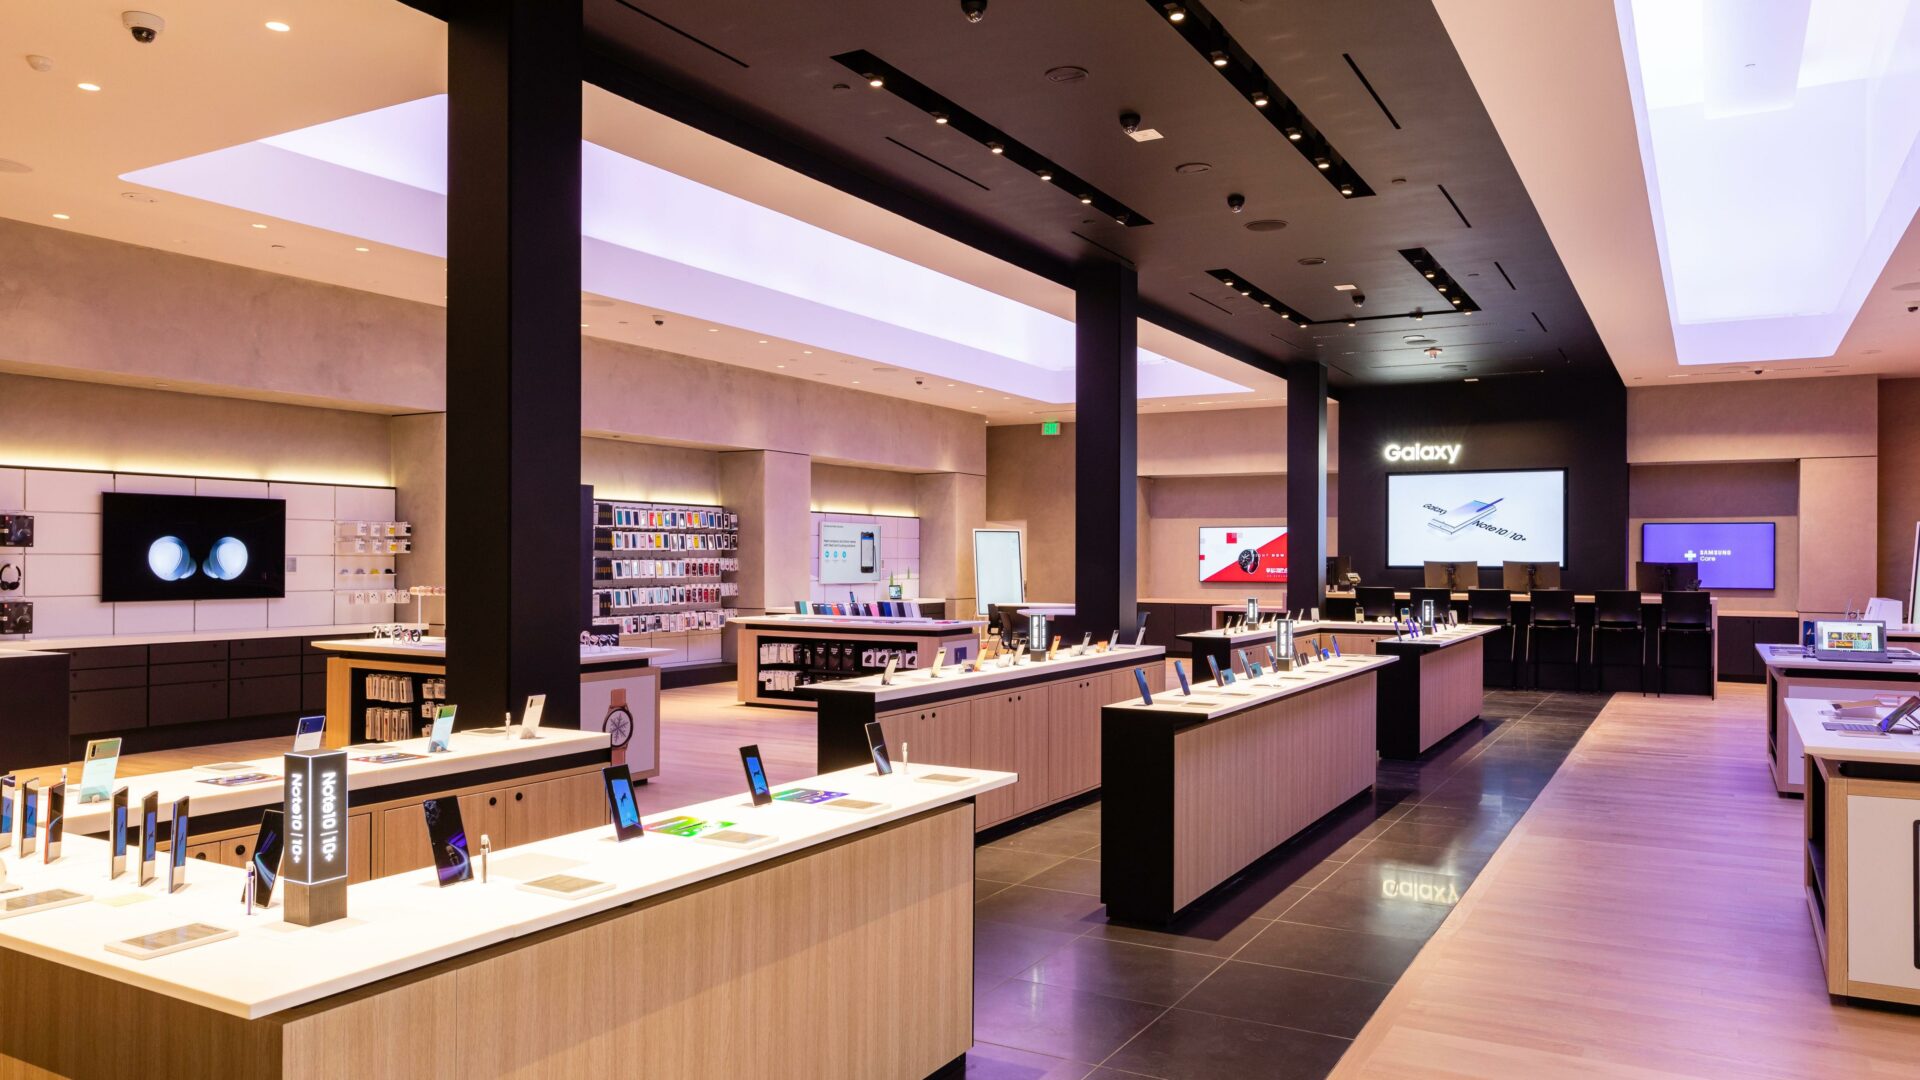 Samsung Experience Store5